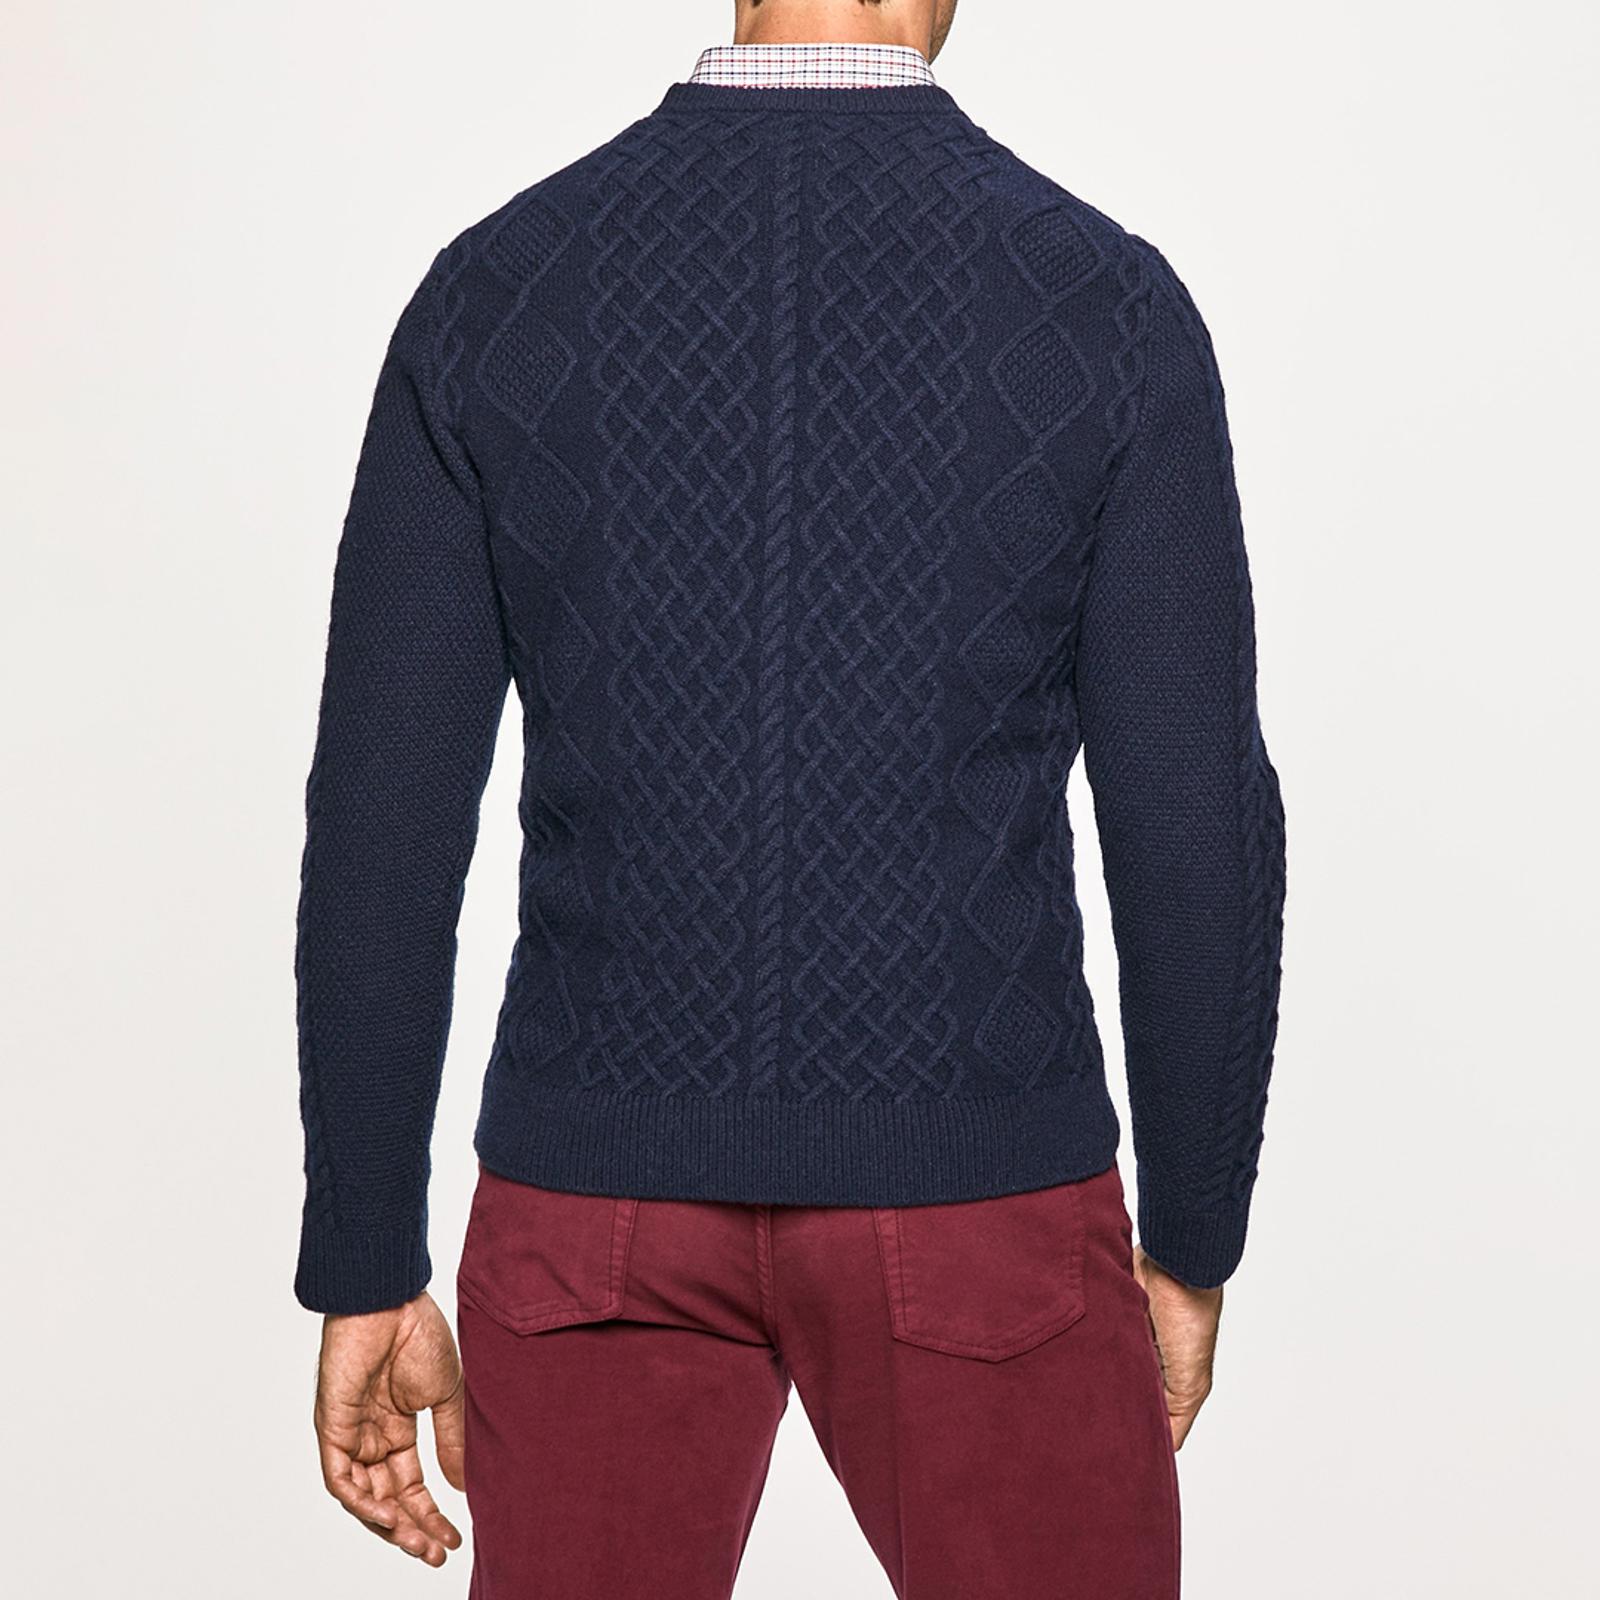 Navy Cable Knit Jumper - BrandAlley